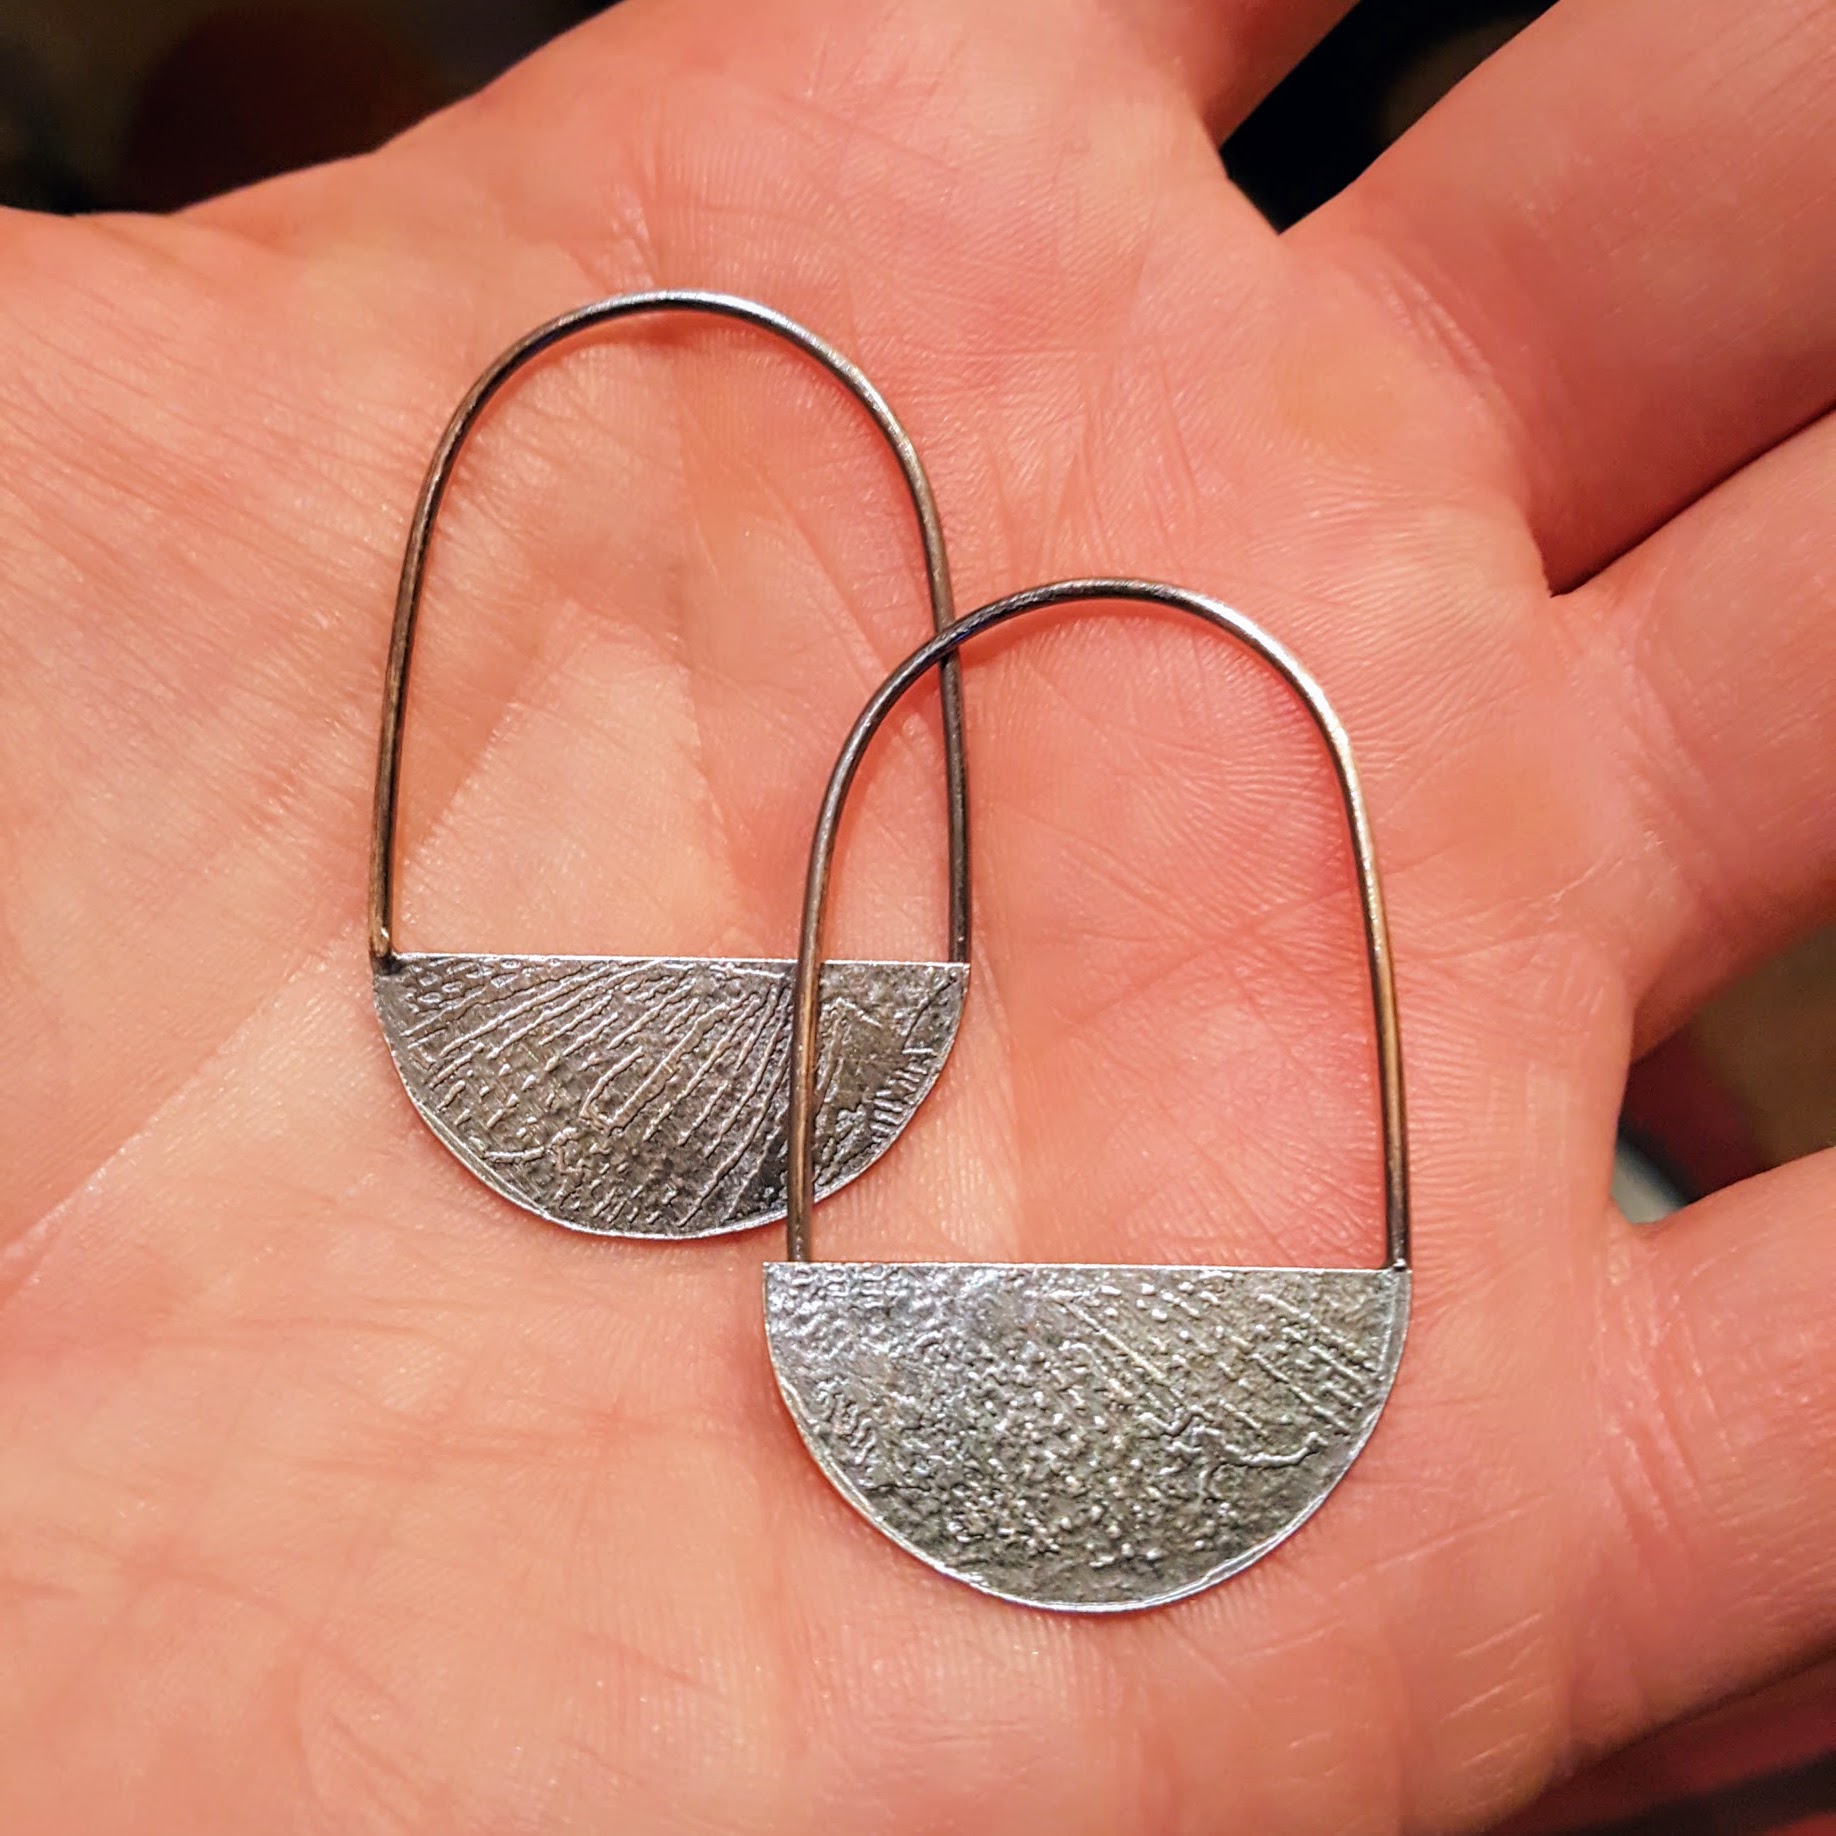 A view of the etched side of the earrings